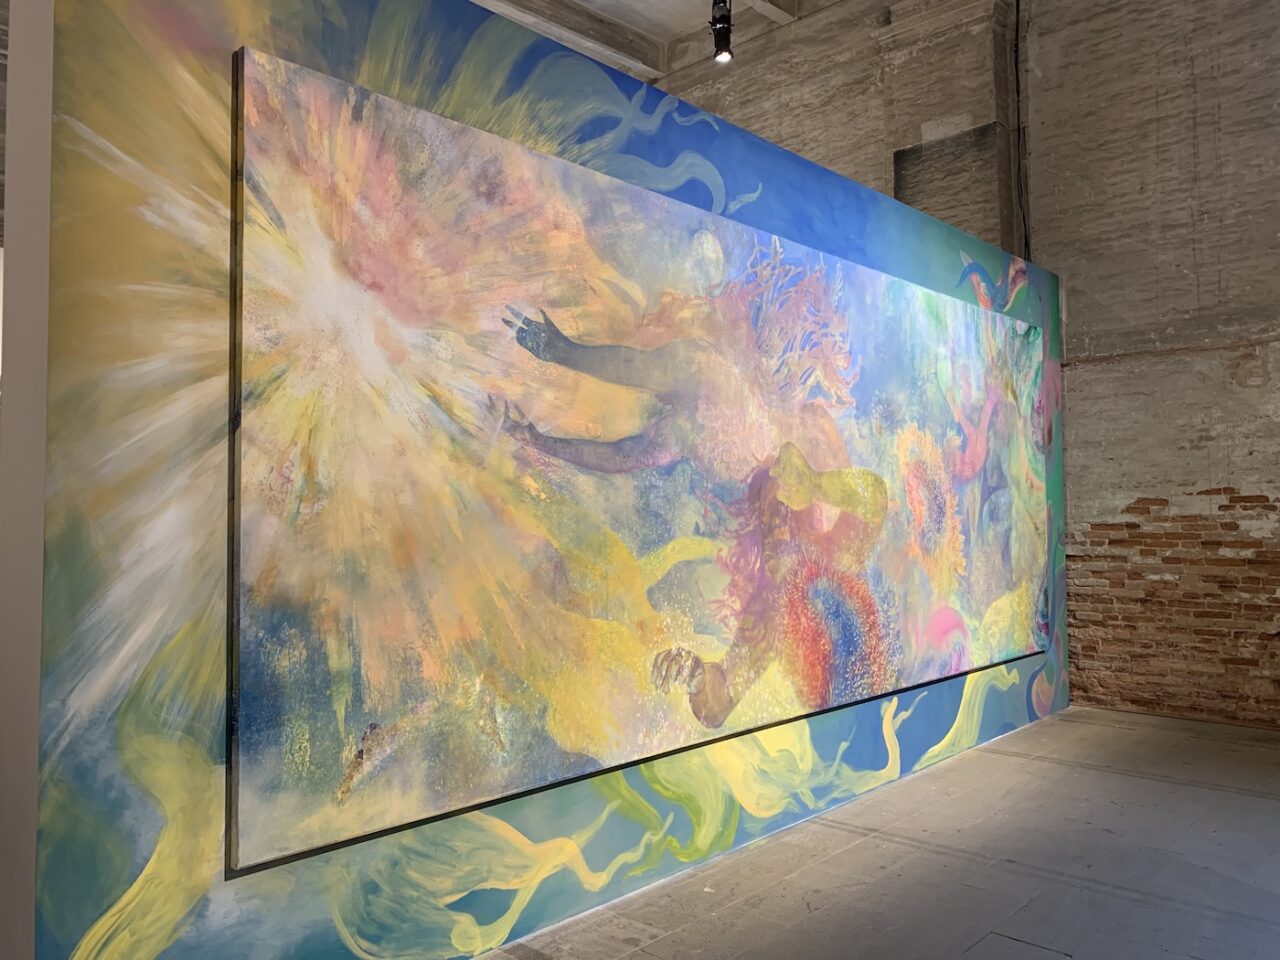 Firelei Baez. Installation View of “The Milk of Dreams” at Arsenale. Photo: C&